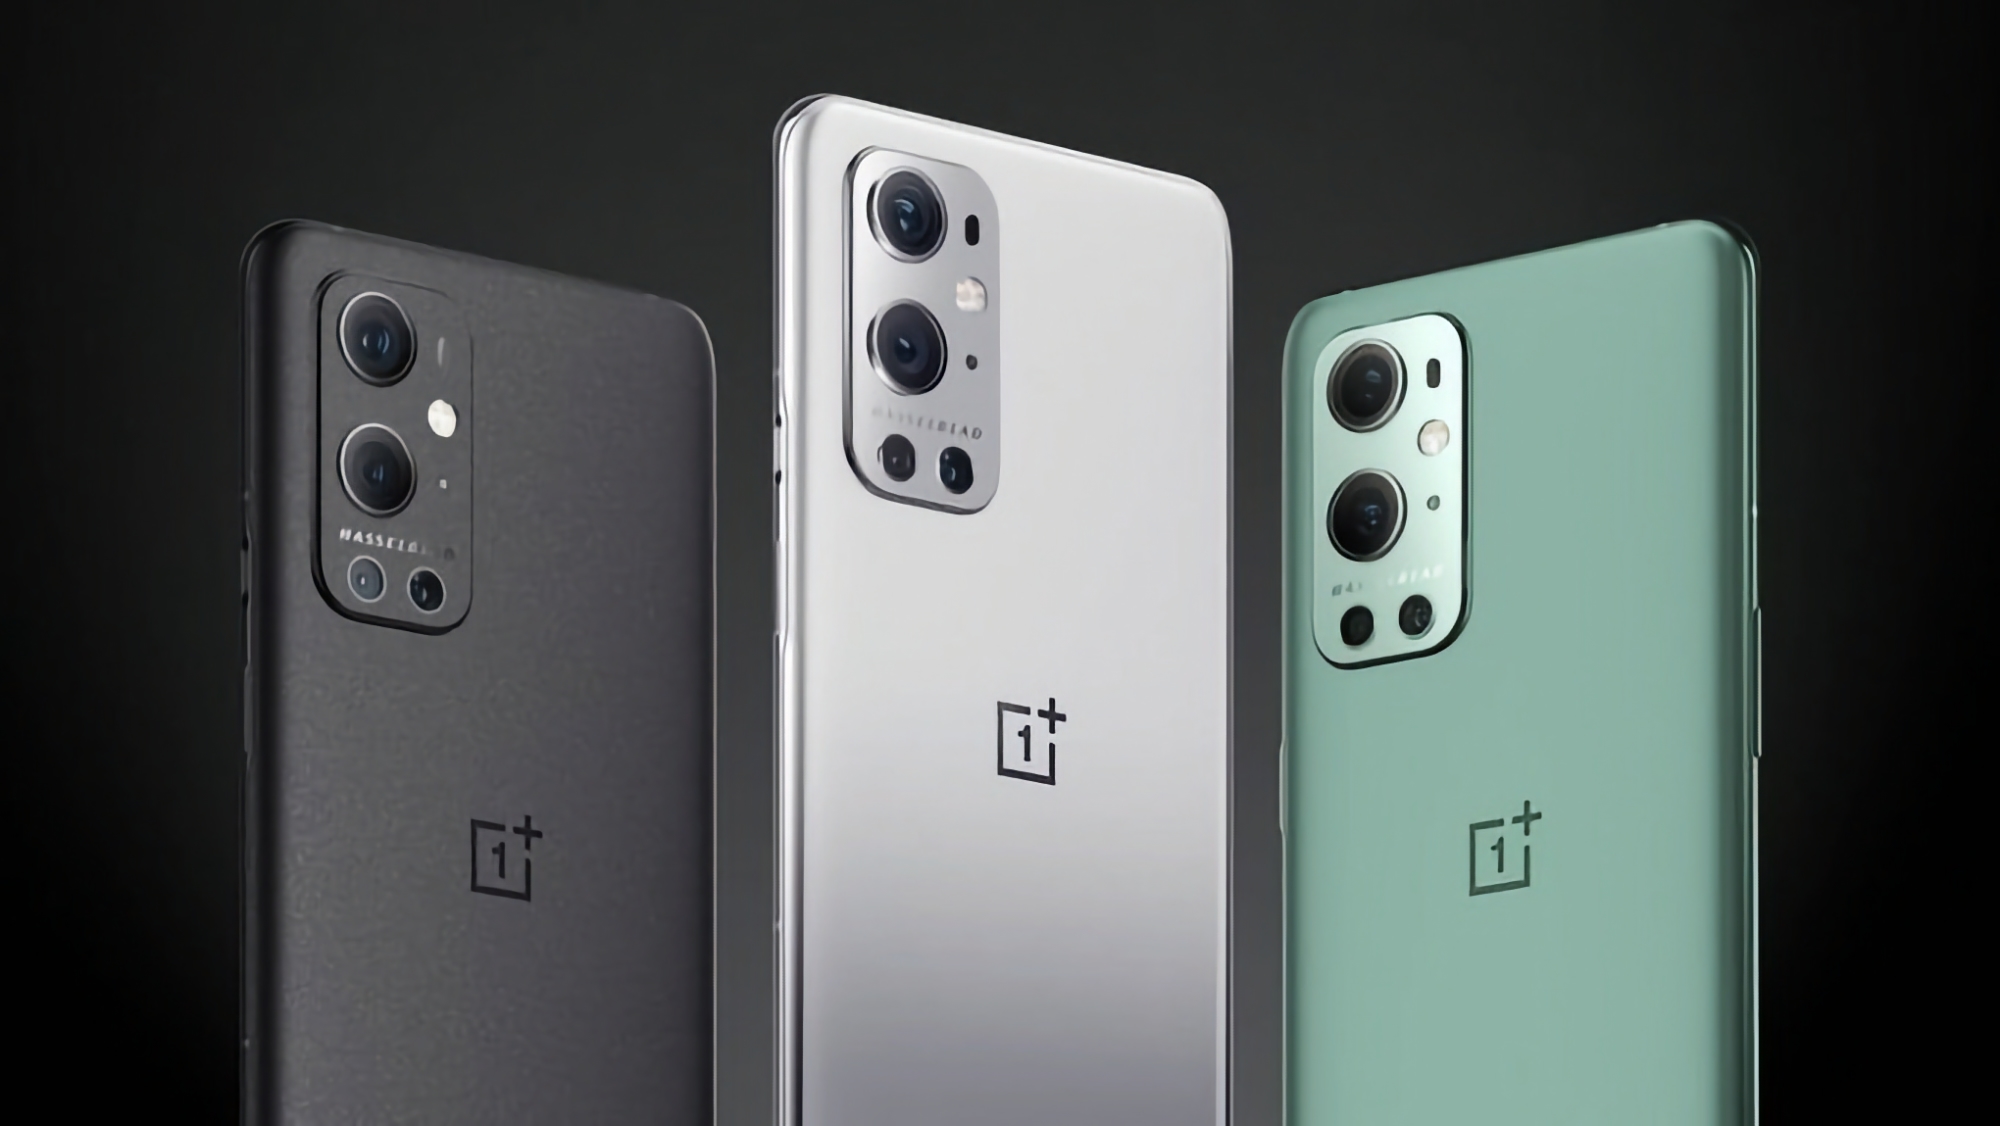 OnePlus 9, OnePlus 9 Pro and OnePlus 9RT have received OxygenOS 14 Open Beta 1 with Android 14 on board